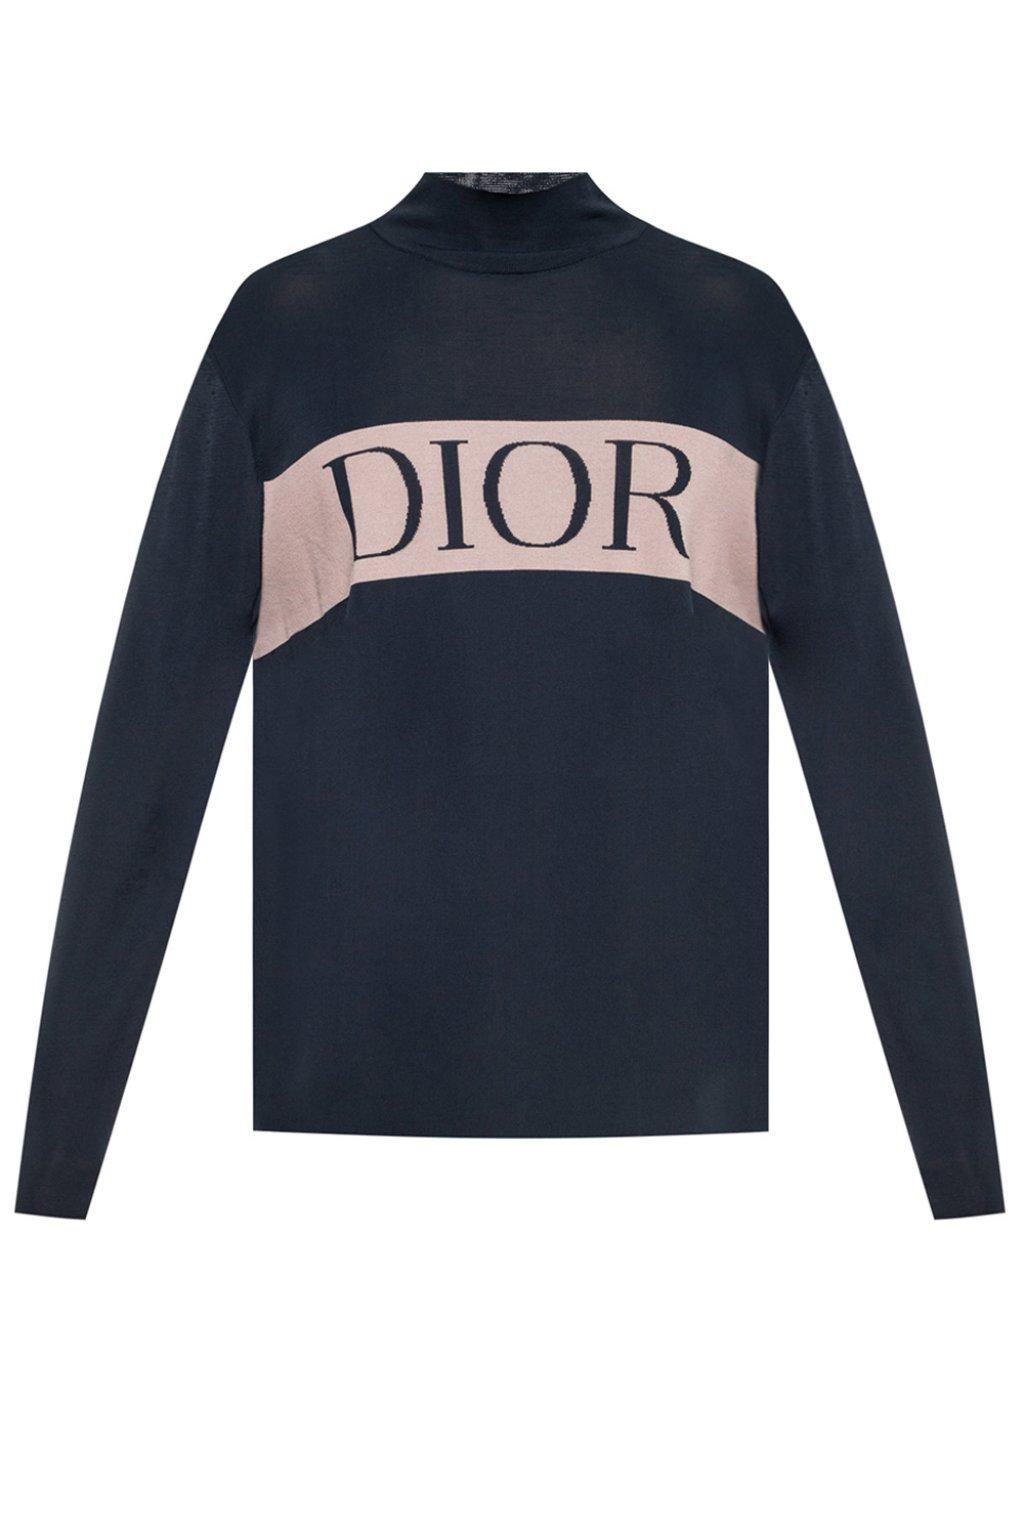 Dior Turtleneck Sweater With Cashmere Stripe in Navy Blue (Blue) for ...